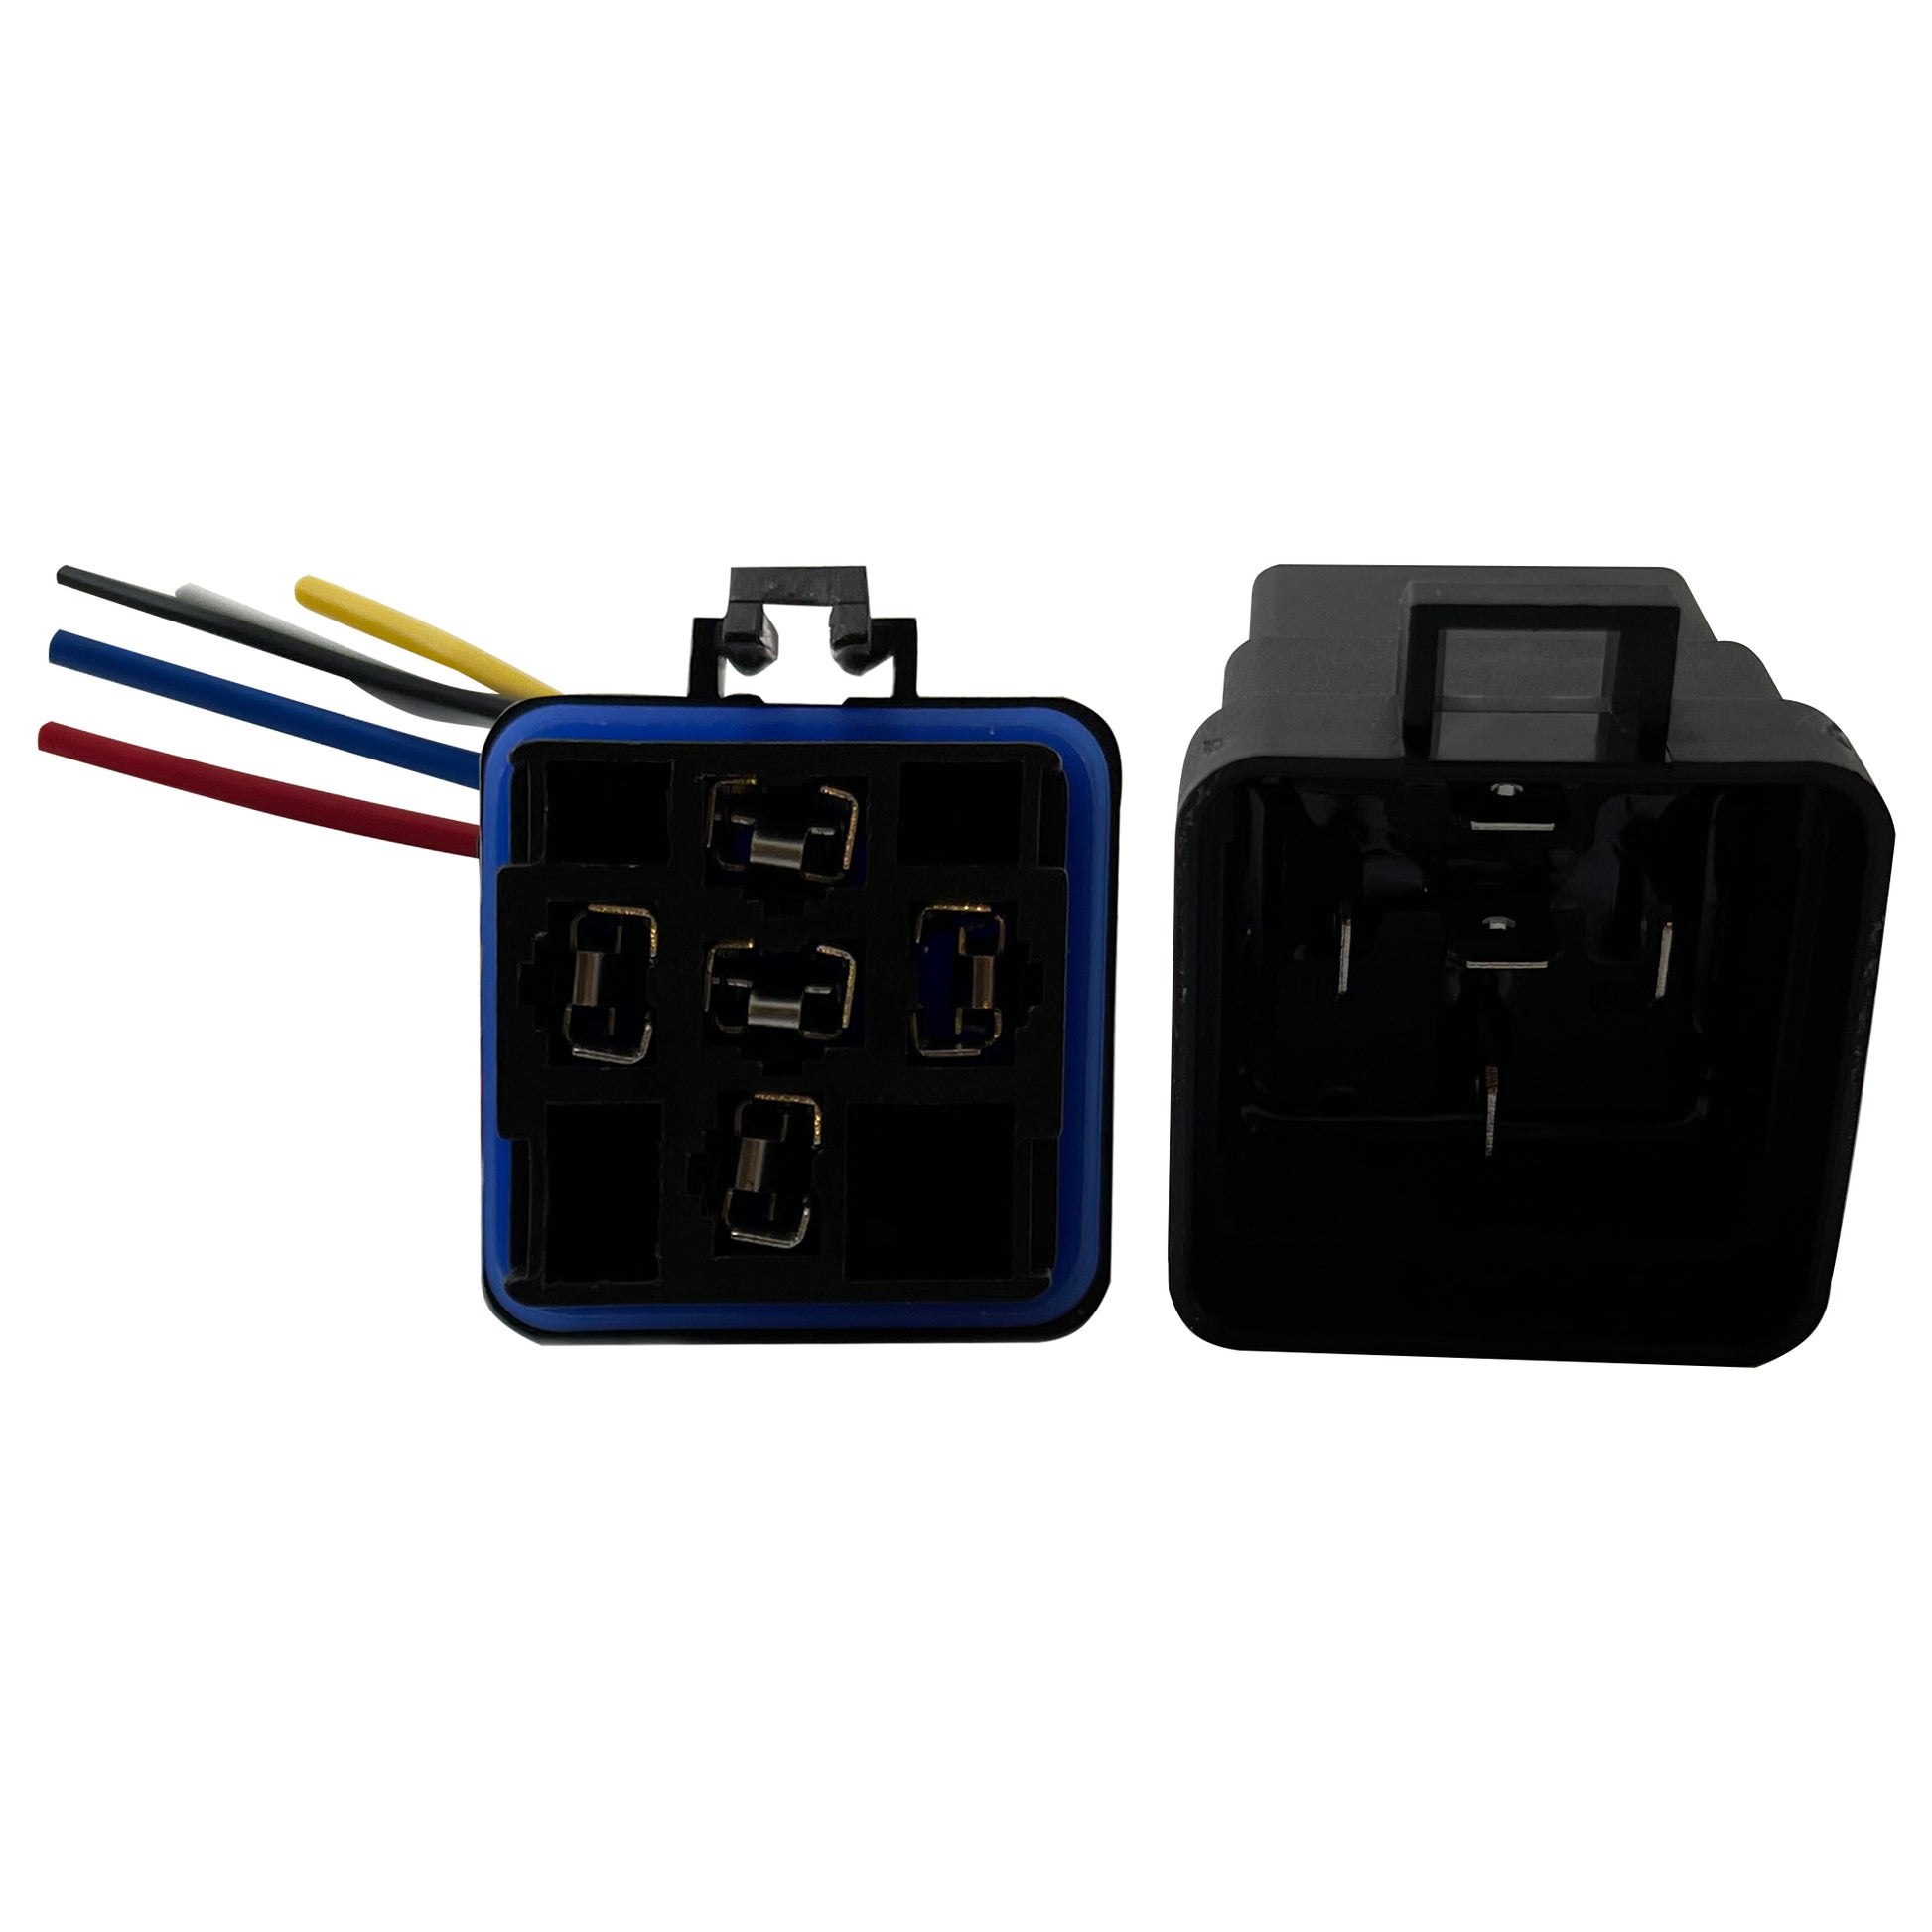 12V Waterproof 5 Pin Relay Switch with Wire Harness Set